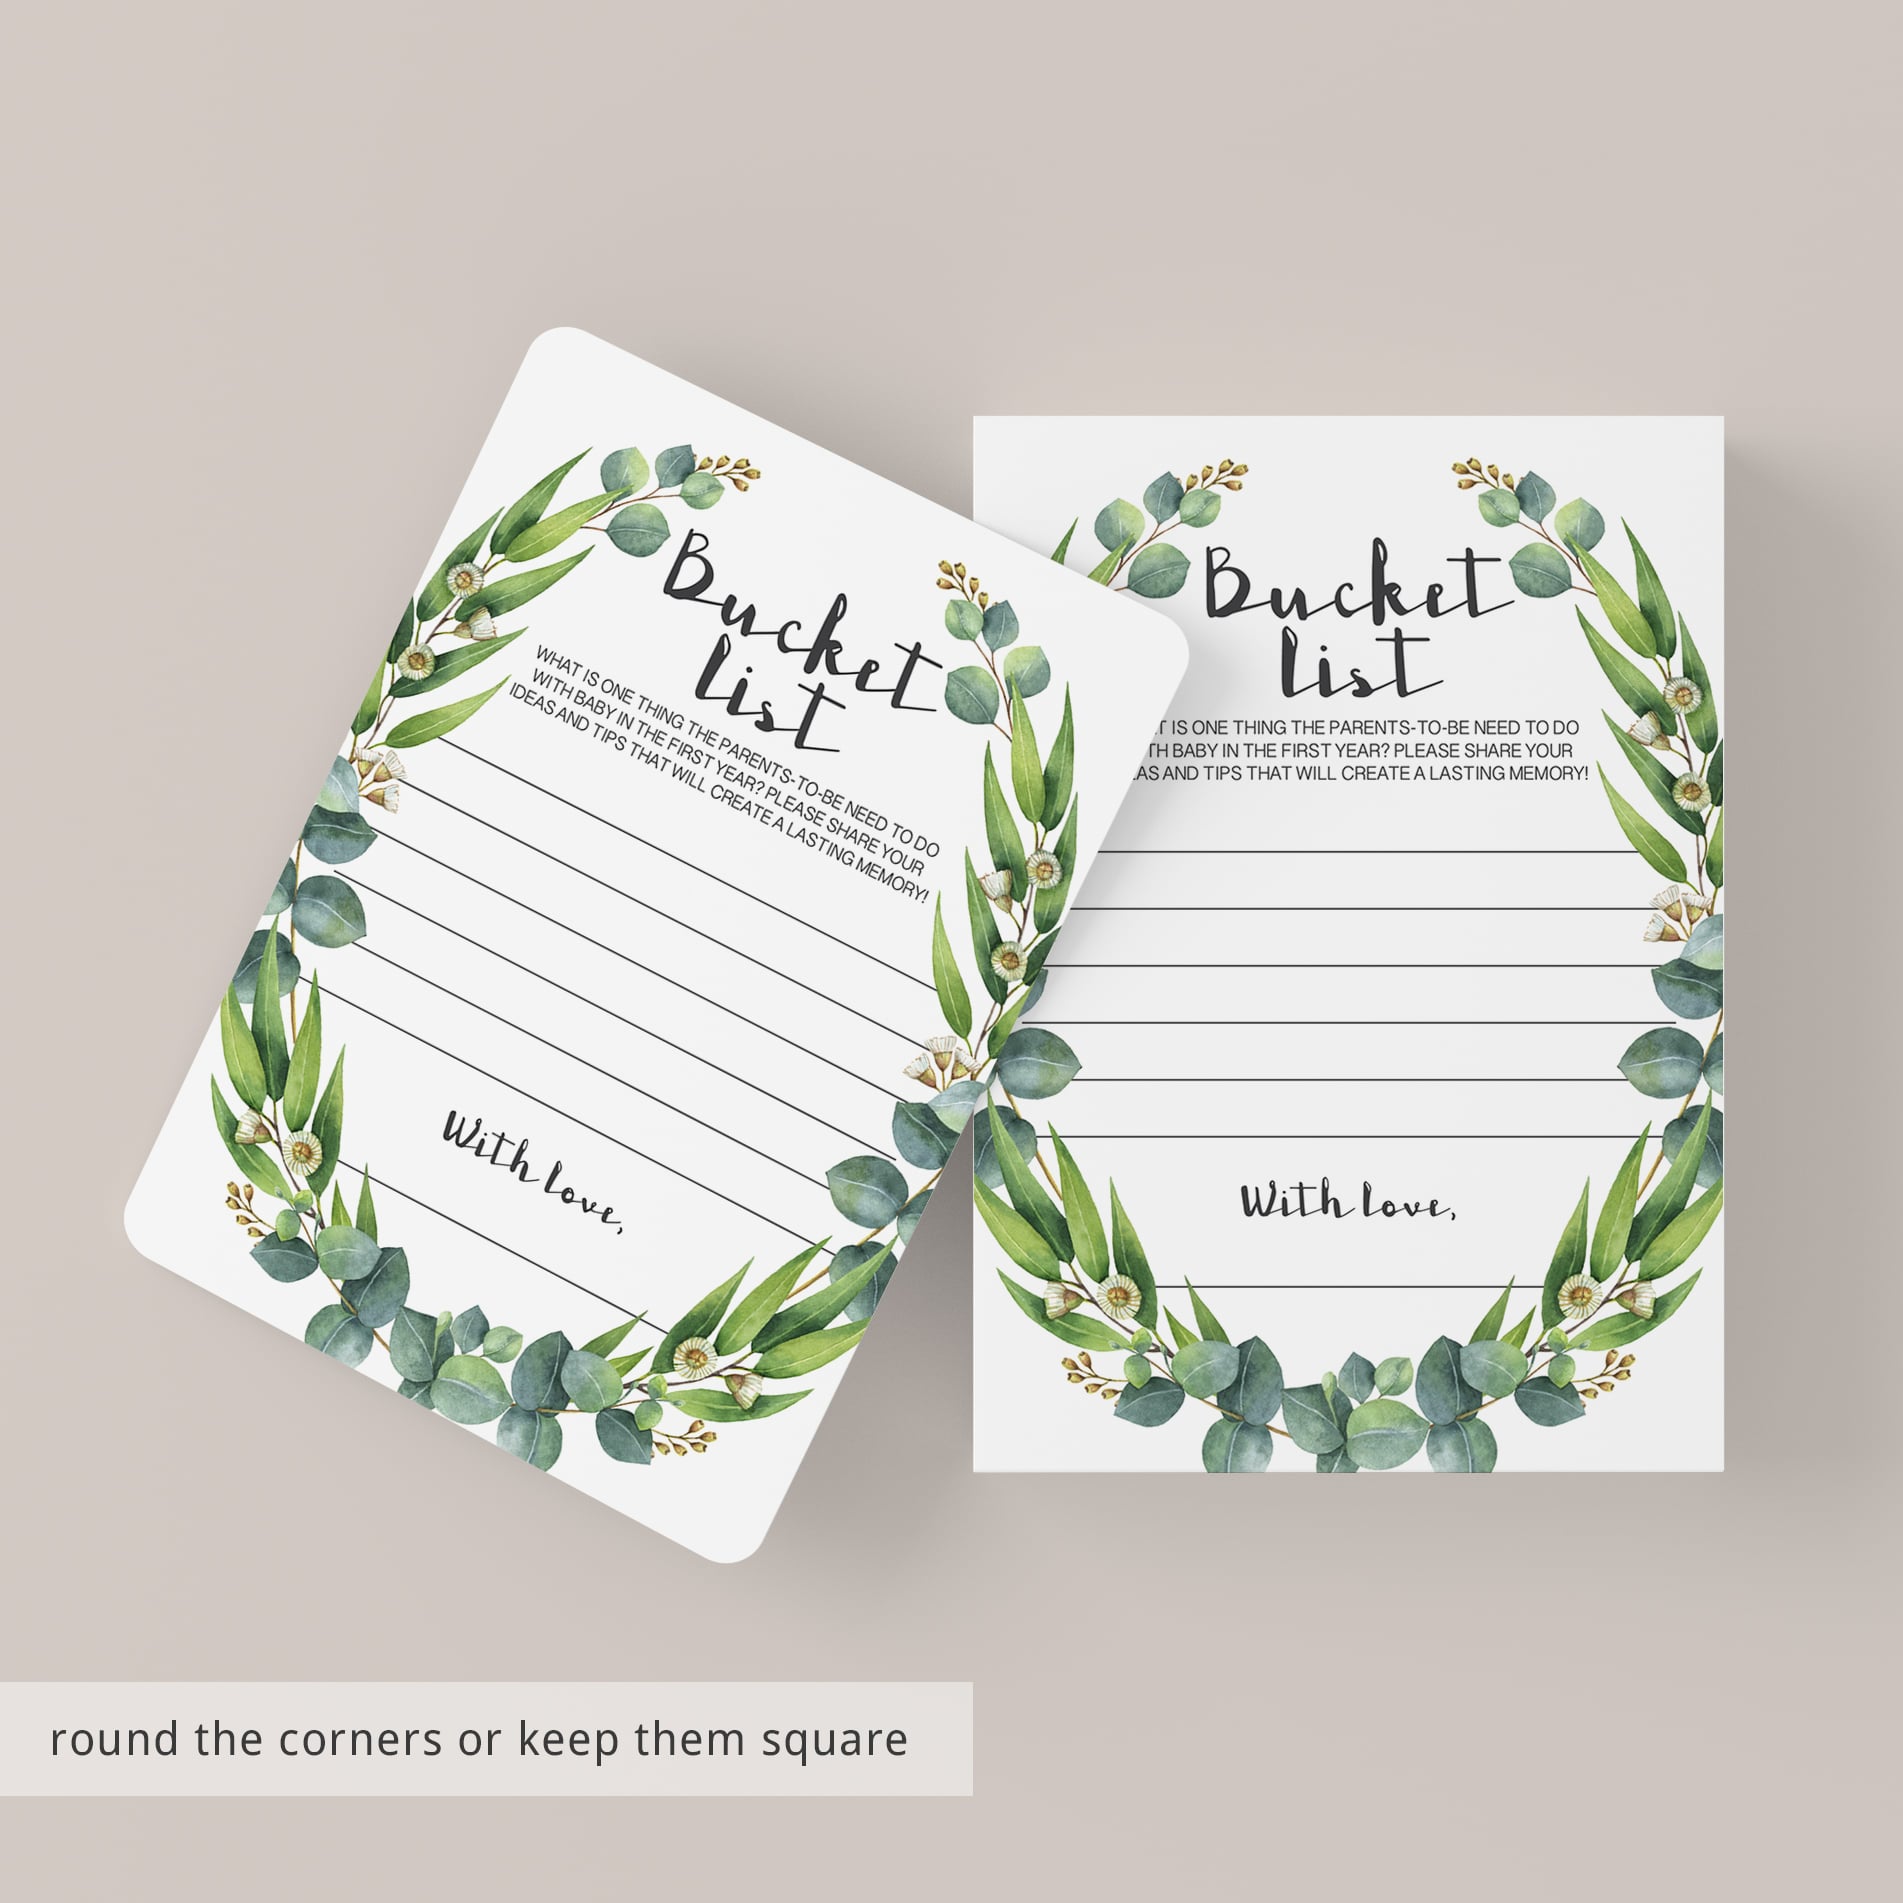 Bucket list for baby cards green wreath by LittleSizzle